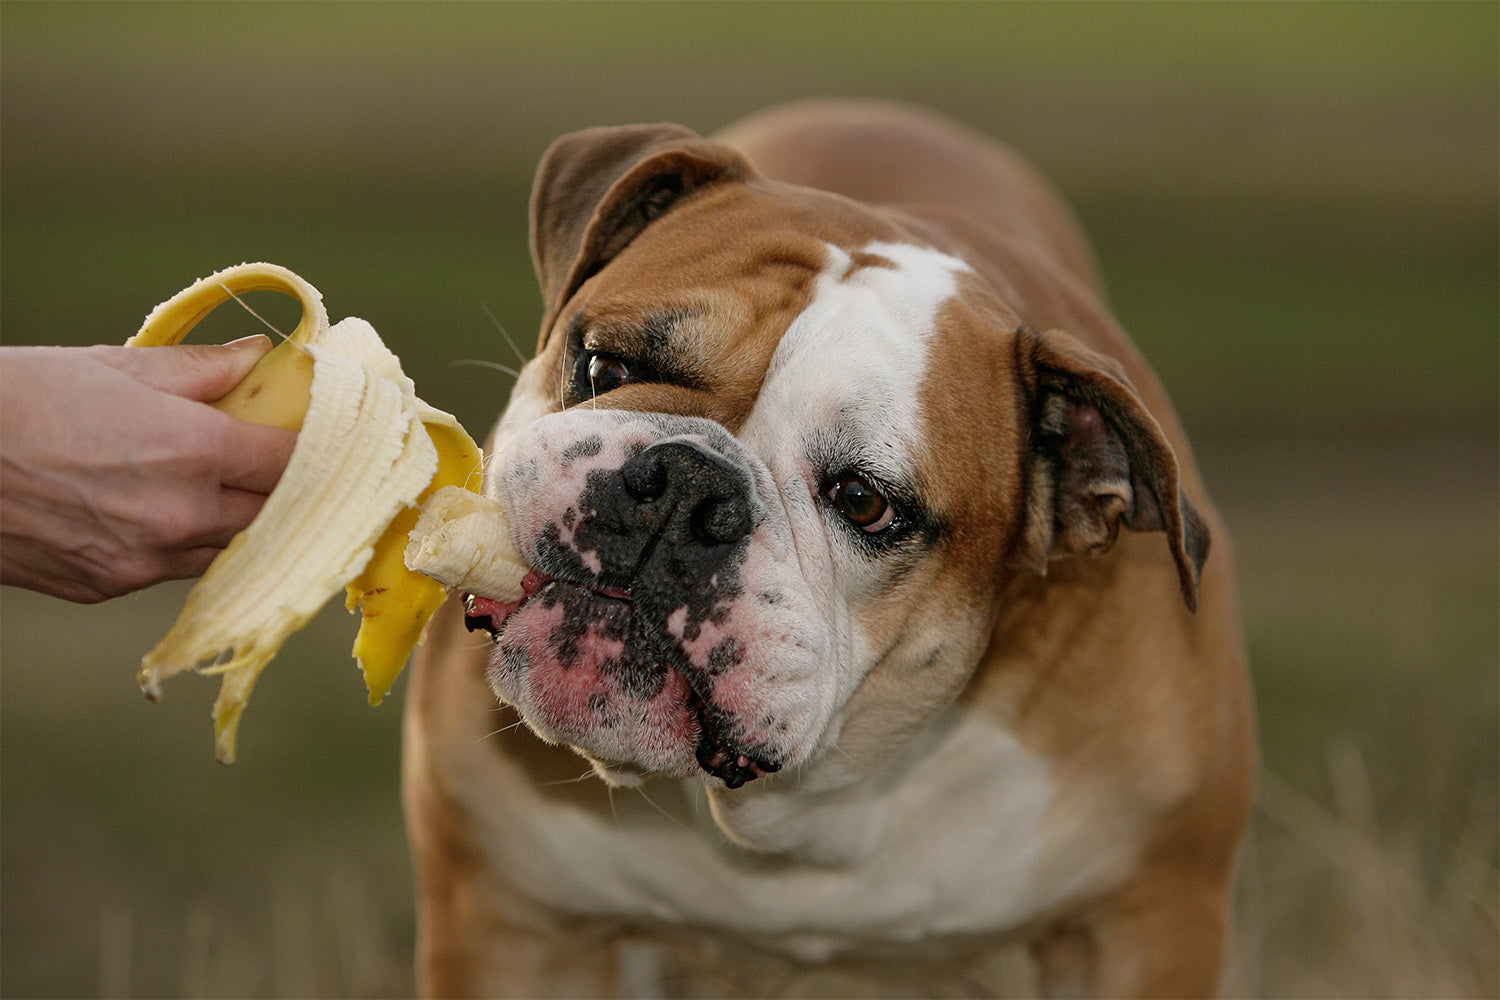 are frozen bananas safe for dogs